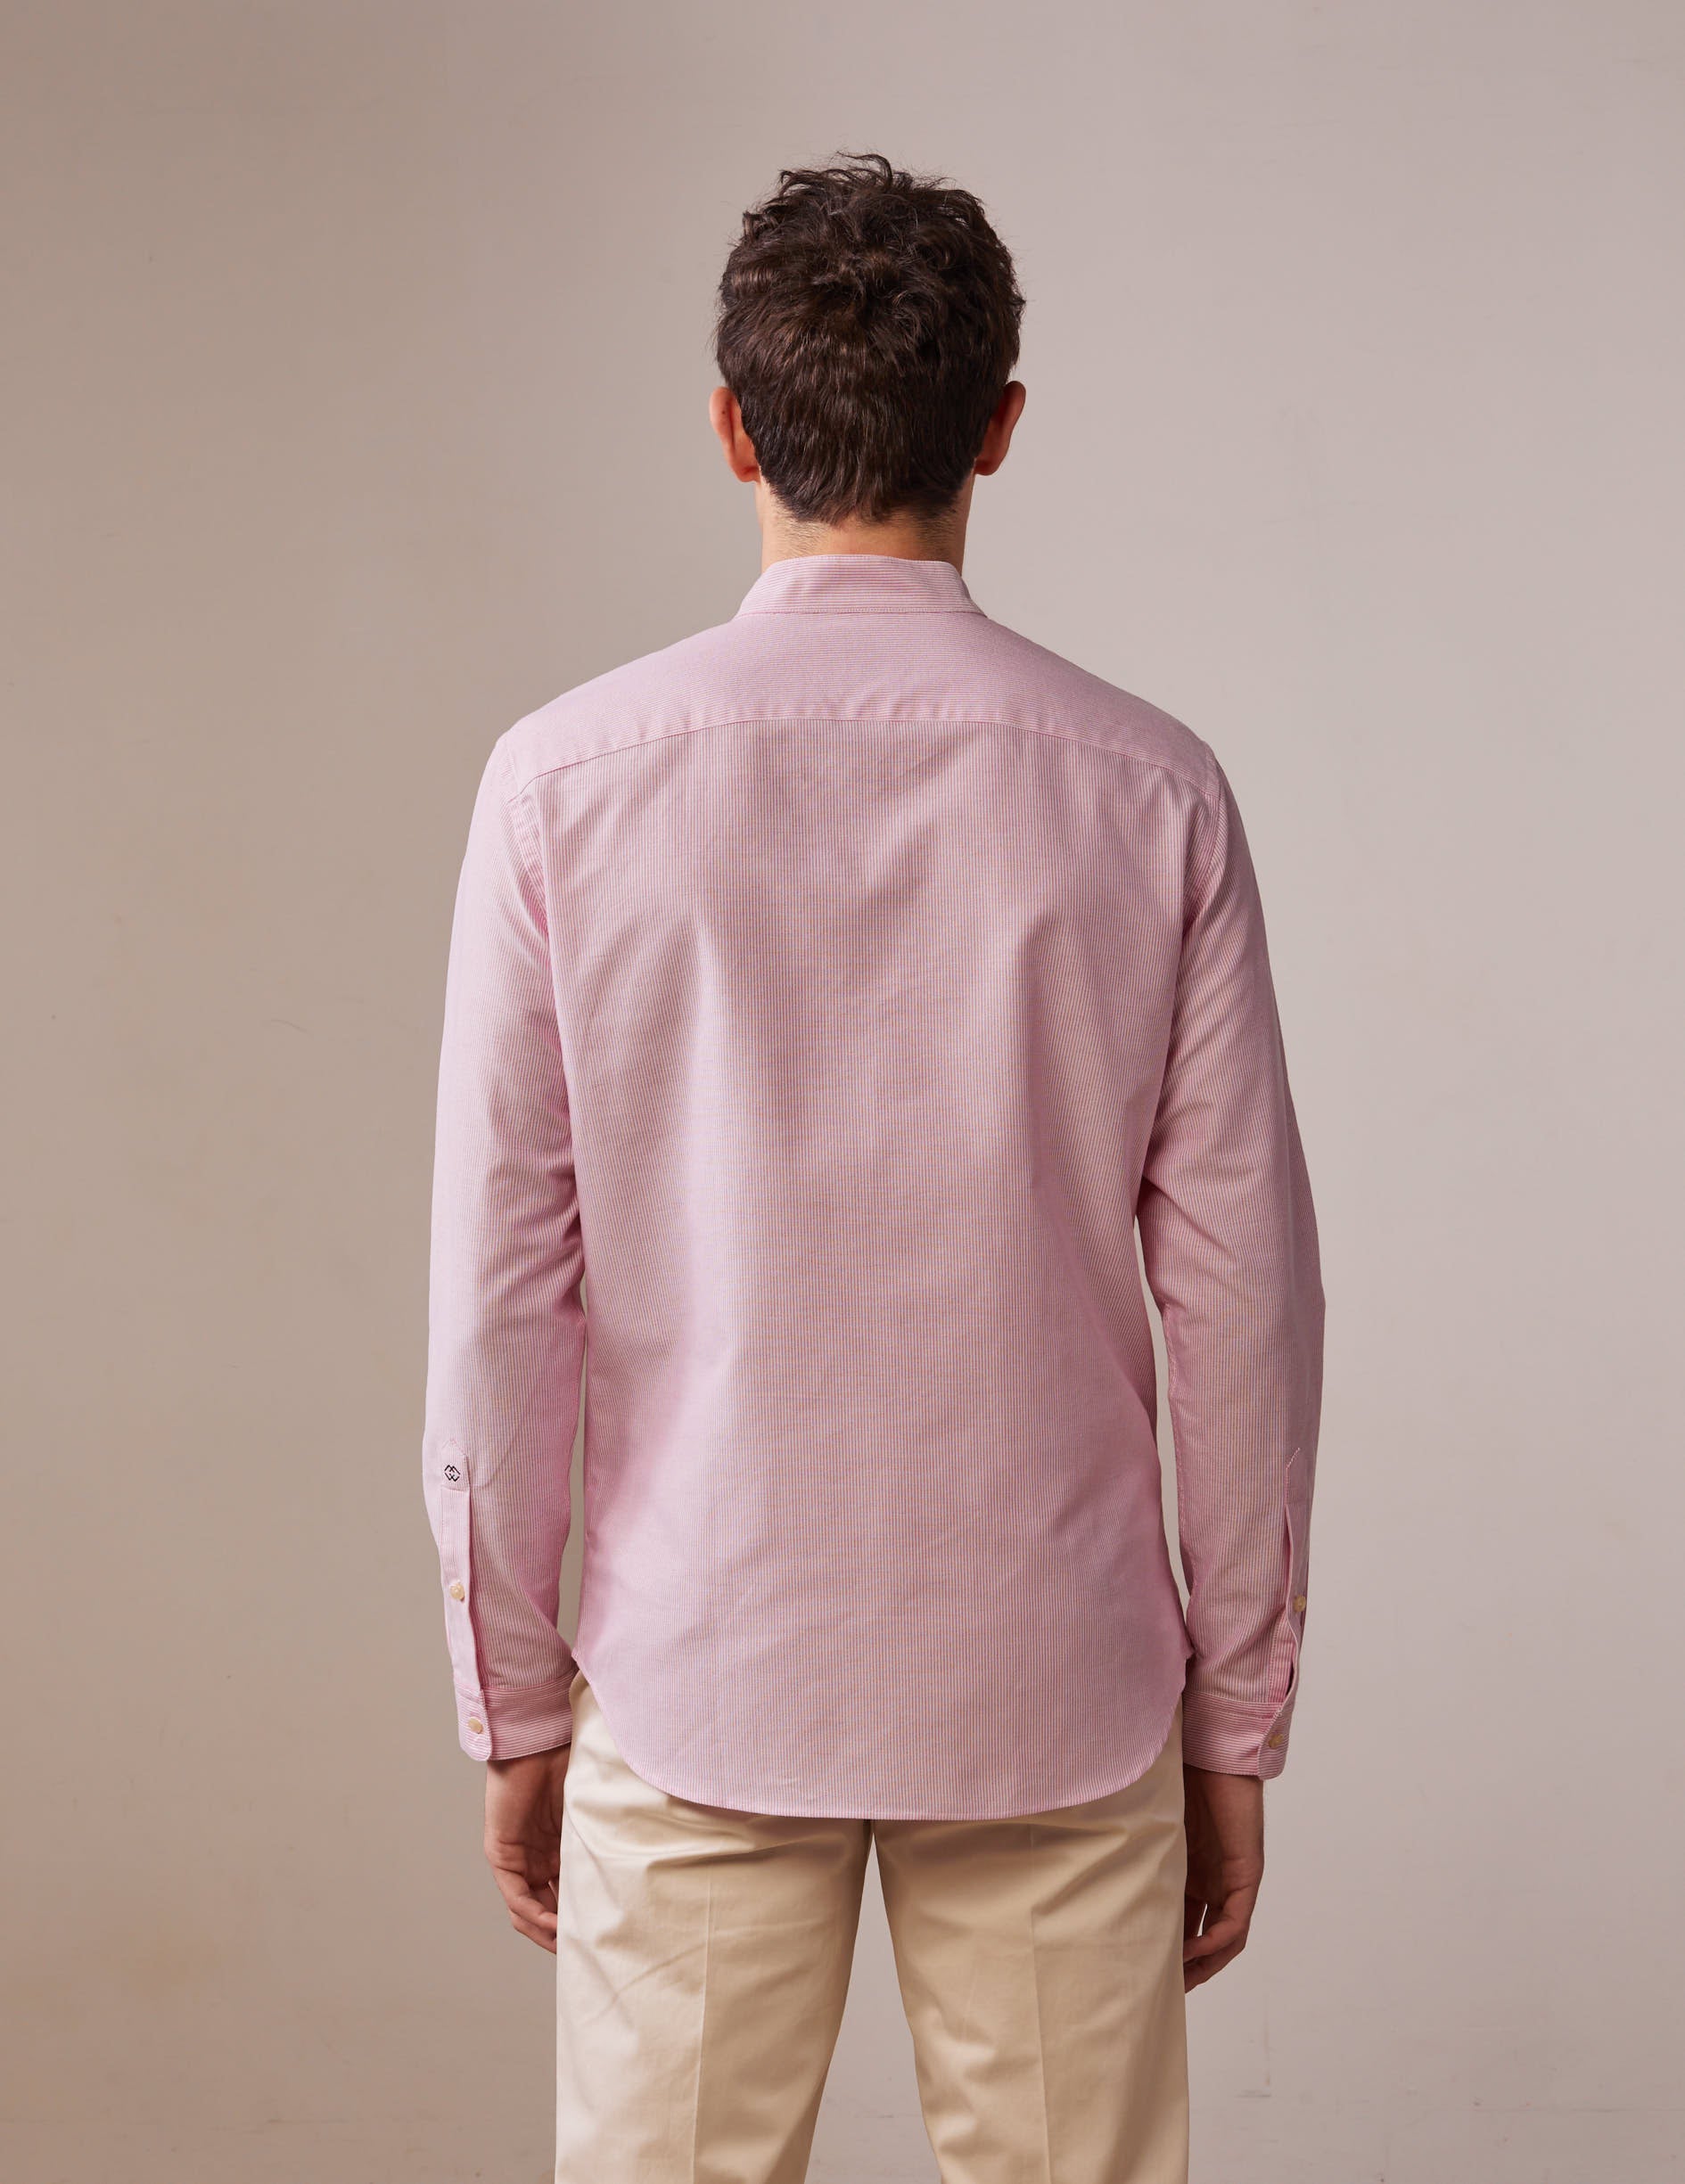 Striped pink Carl shirt - Oxford - Open straight Collar